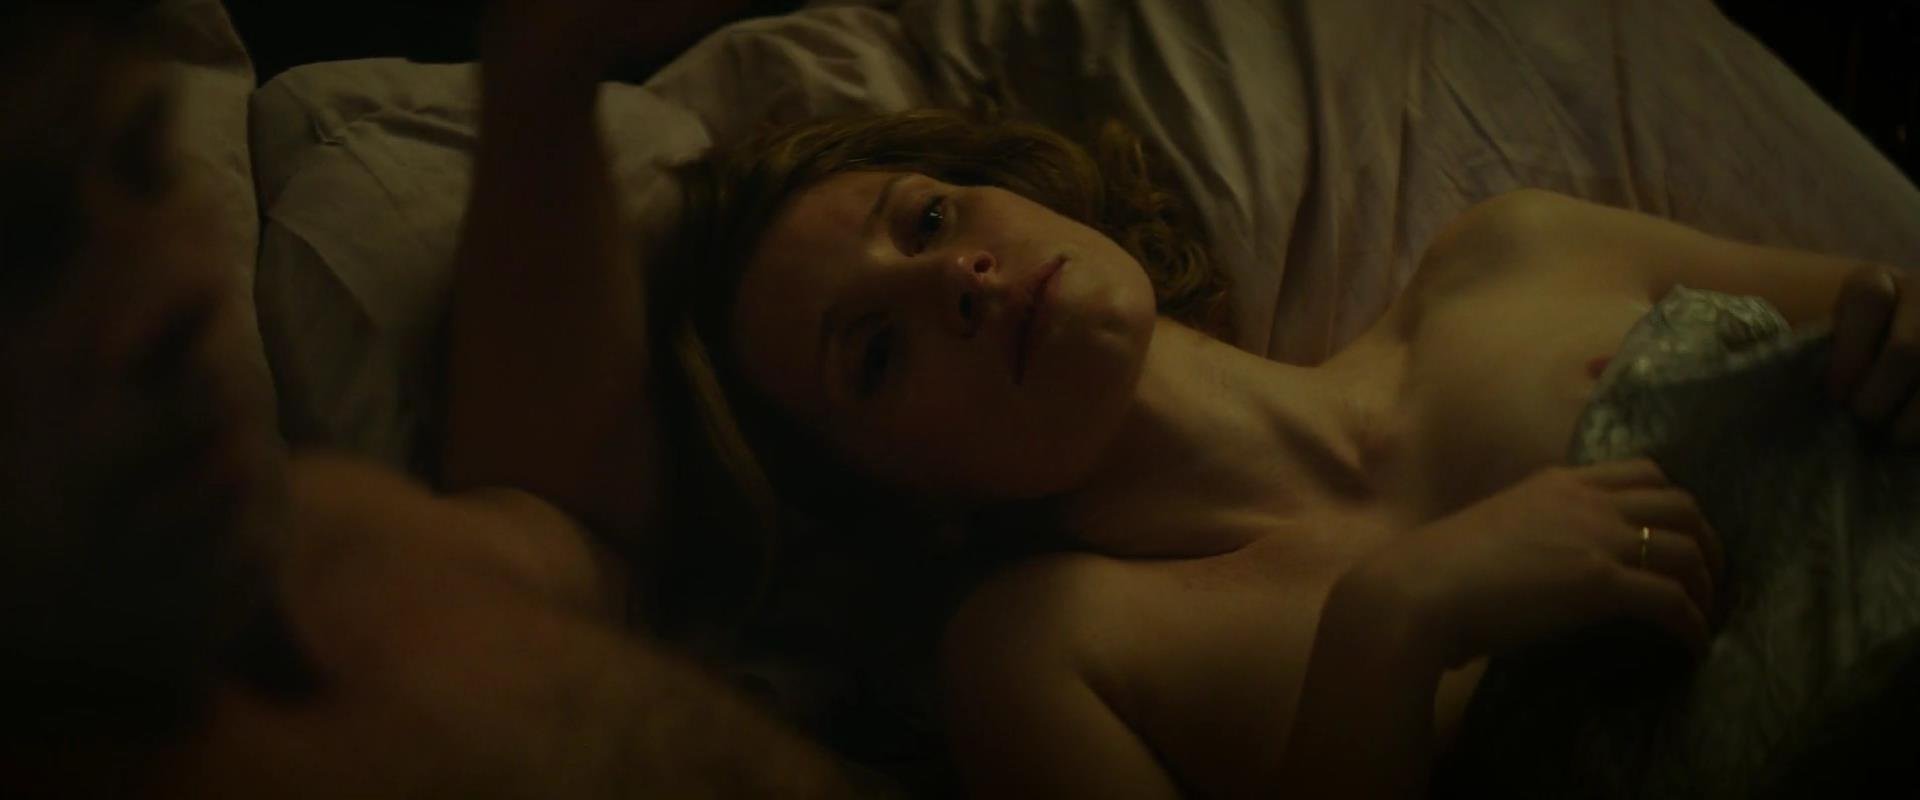 jessica chastain nude